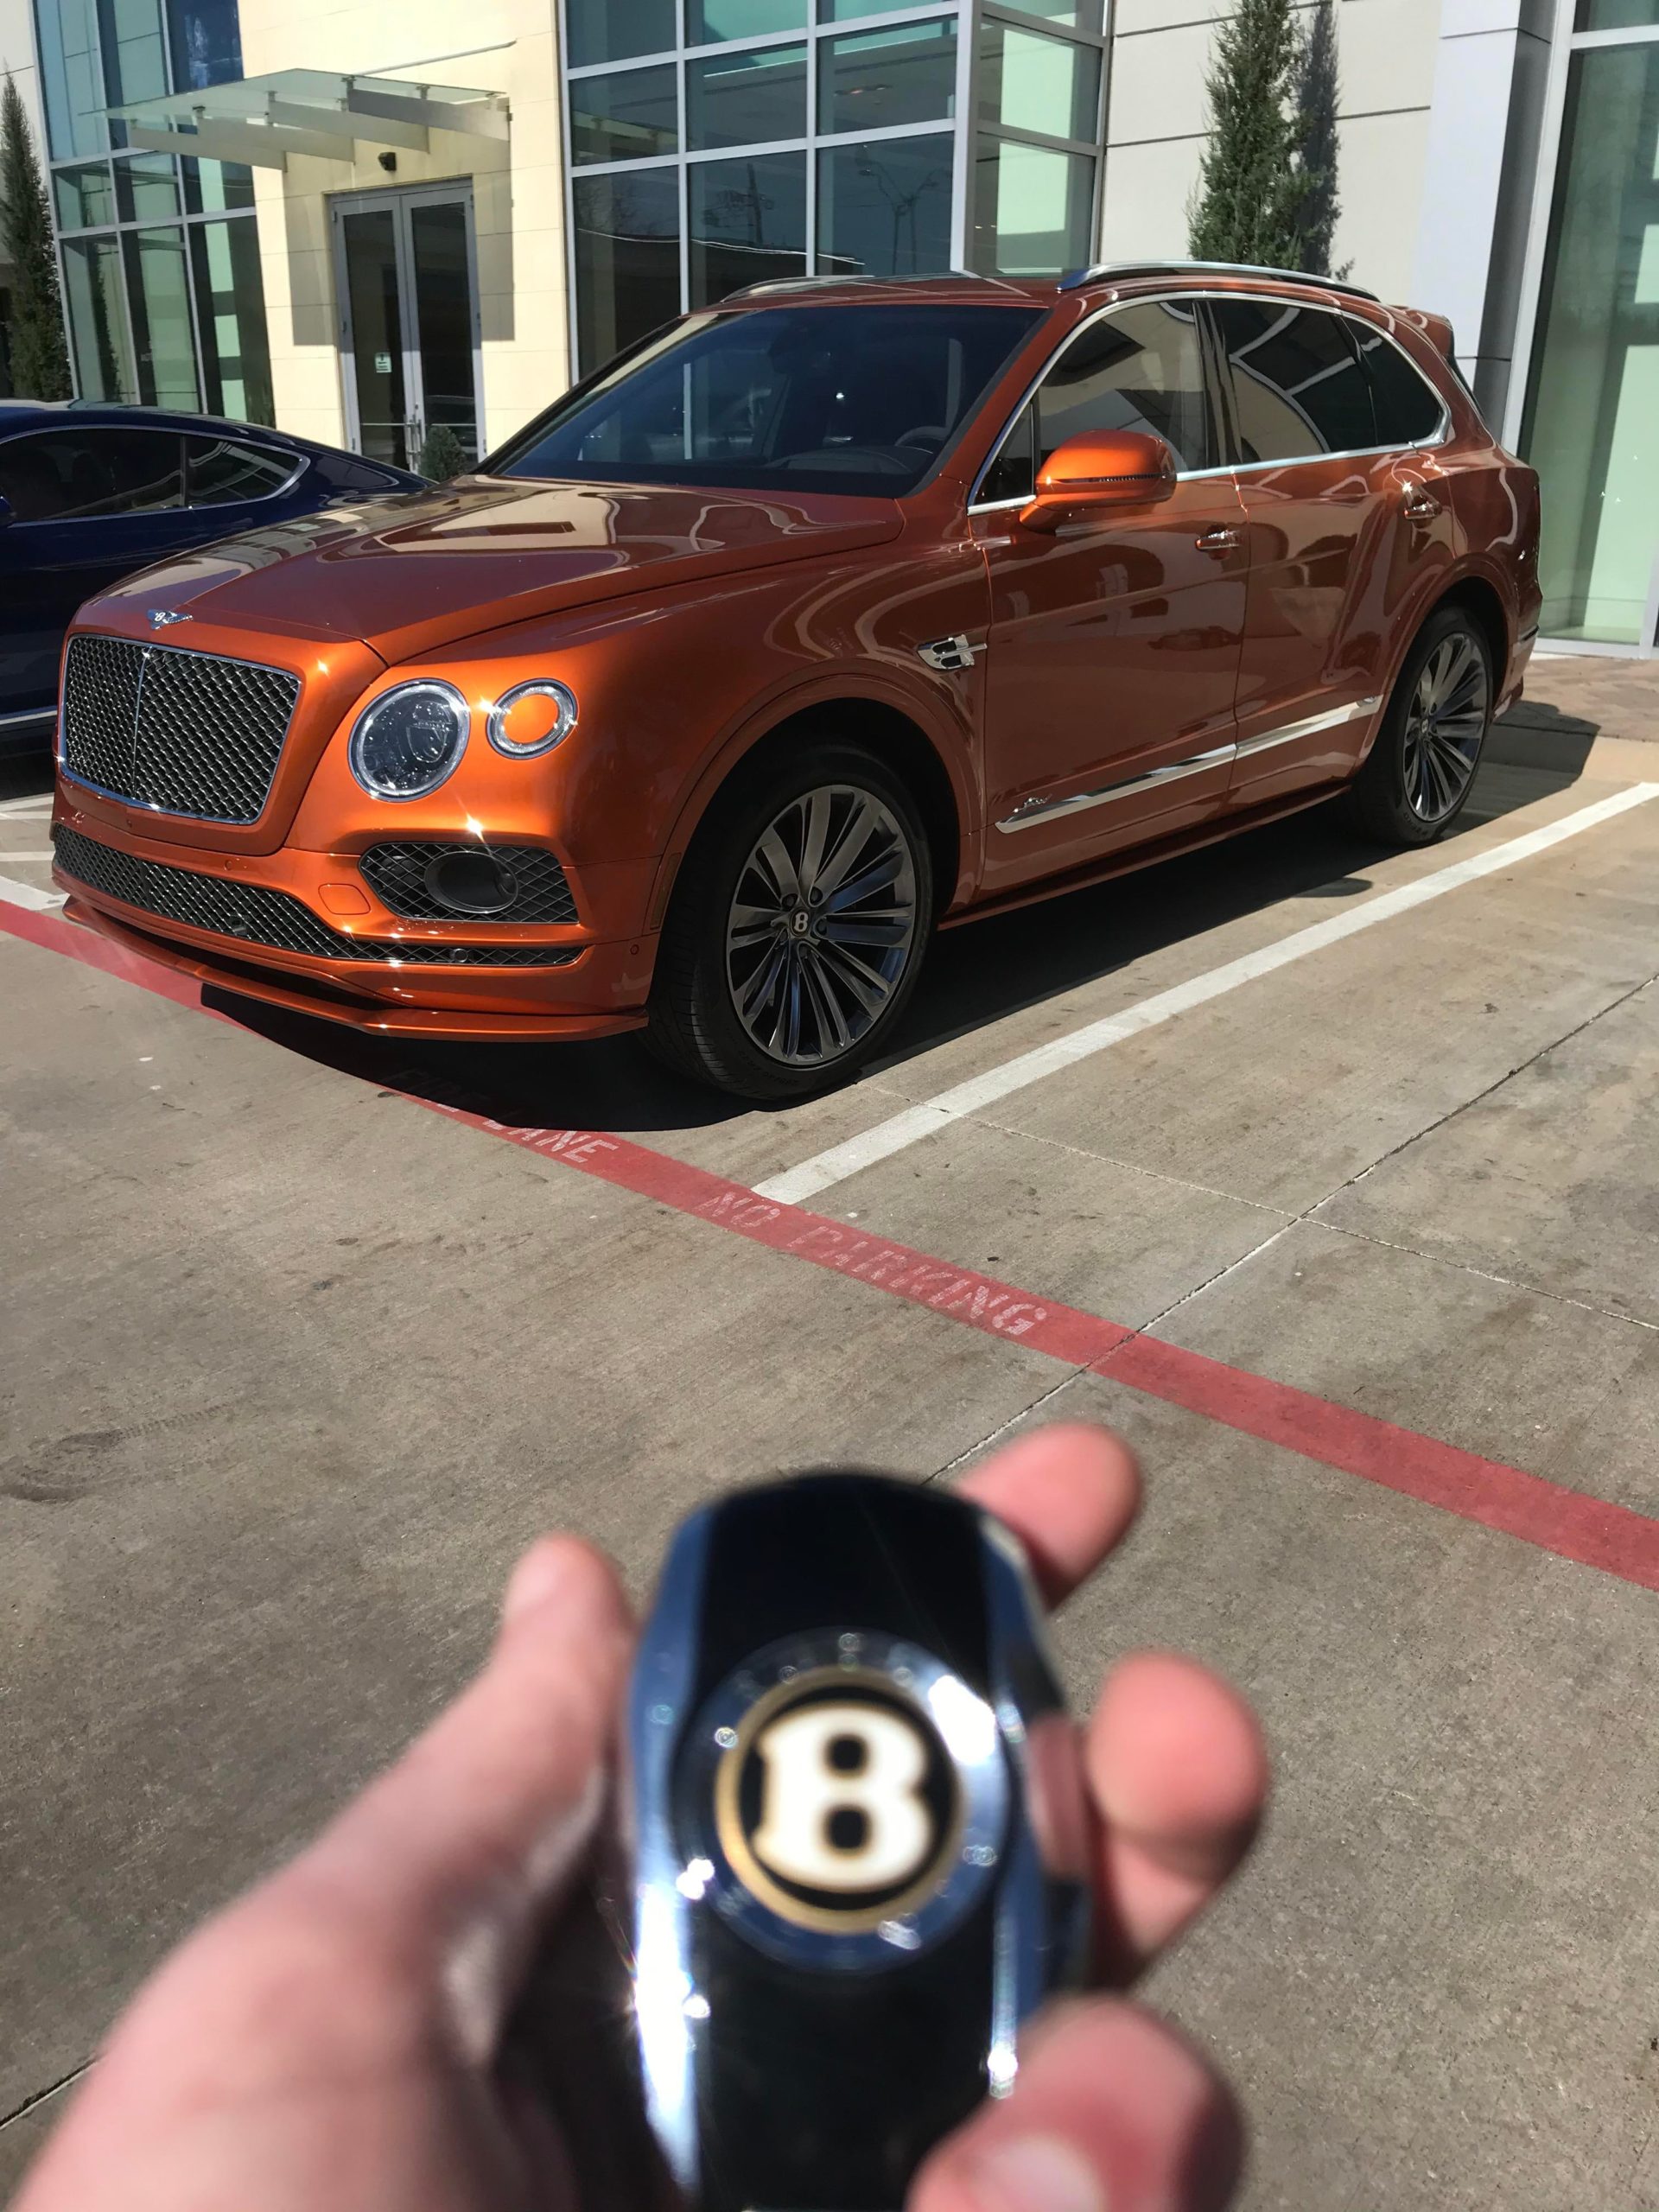 Bentley Bentayga Speed. The fastest production SUV on the planet with a top speed of 190 MPH.